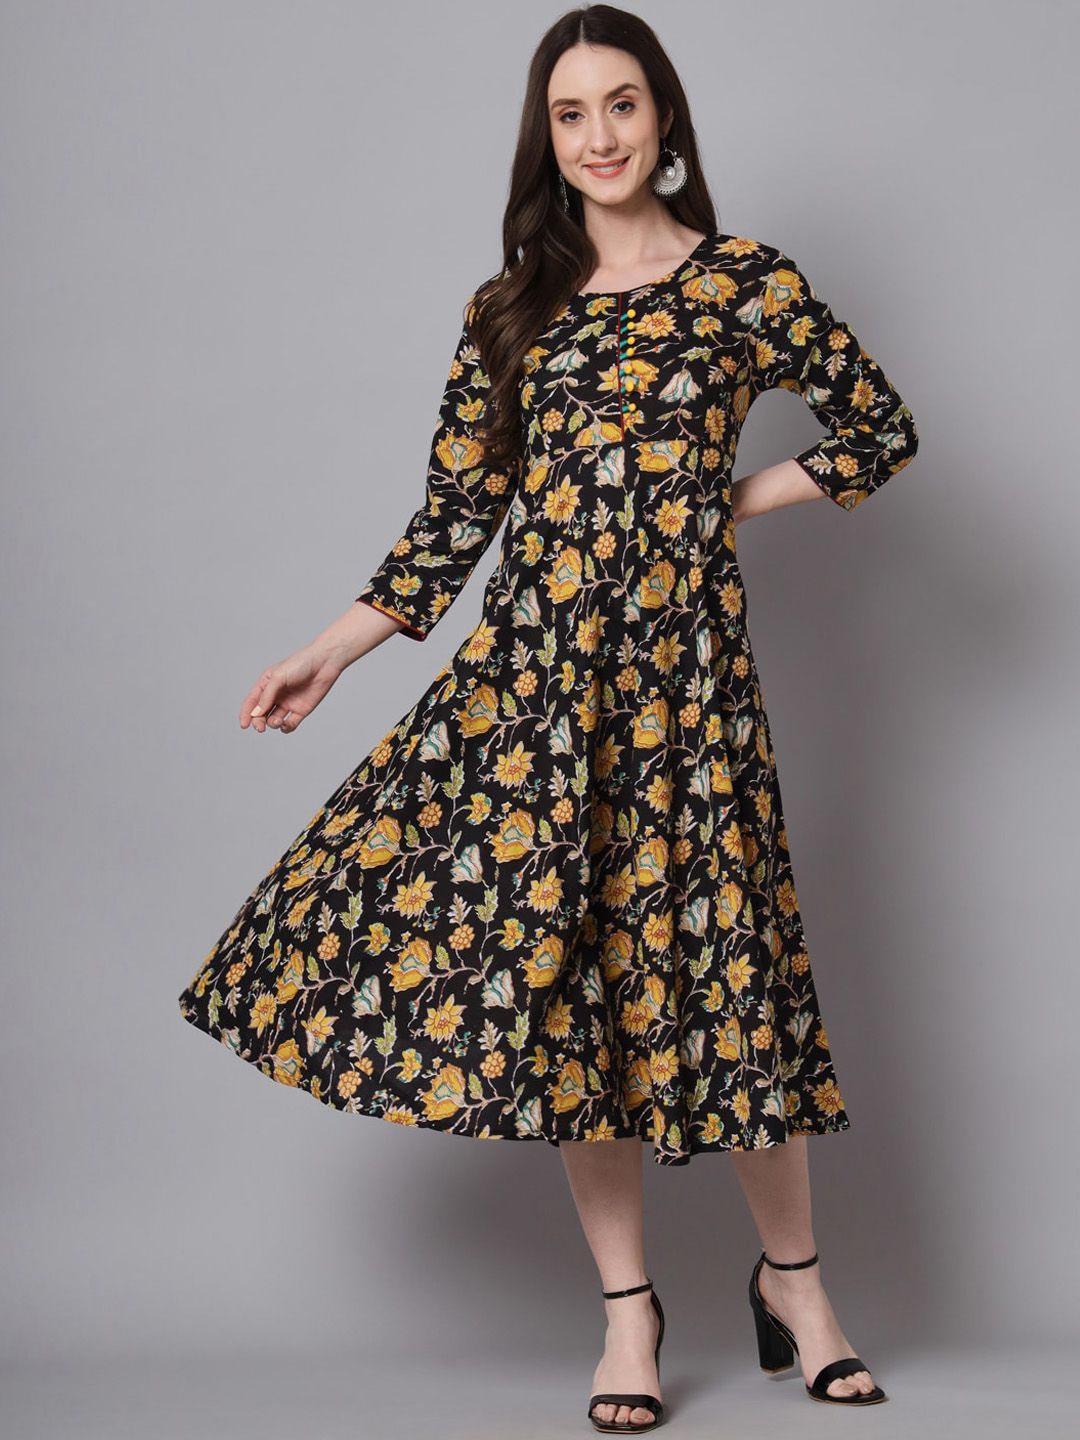 RANGMAYEE Floral Printed Round Neck Fit & Flare Dress Price in India